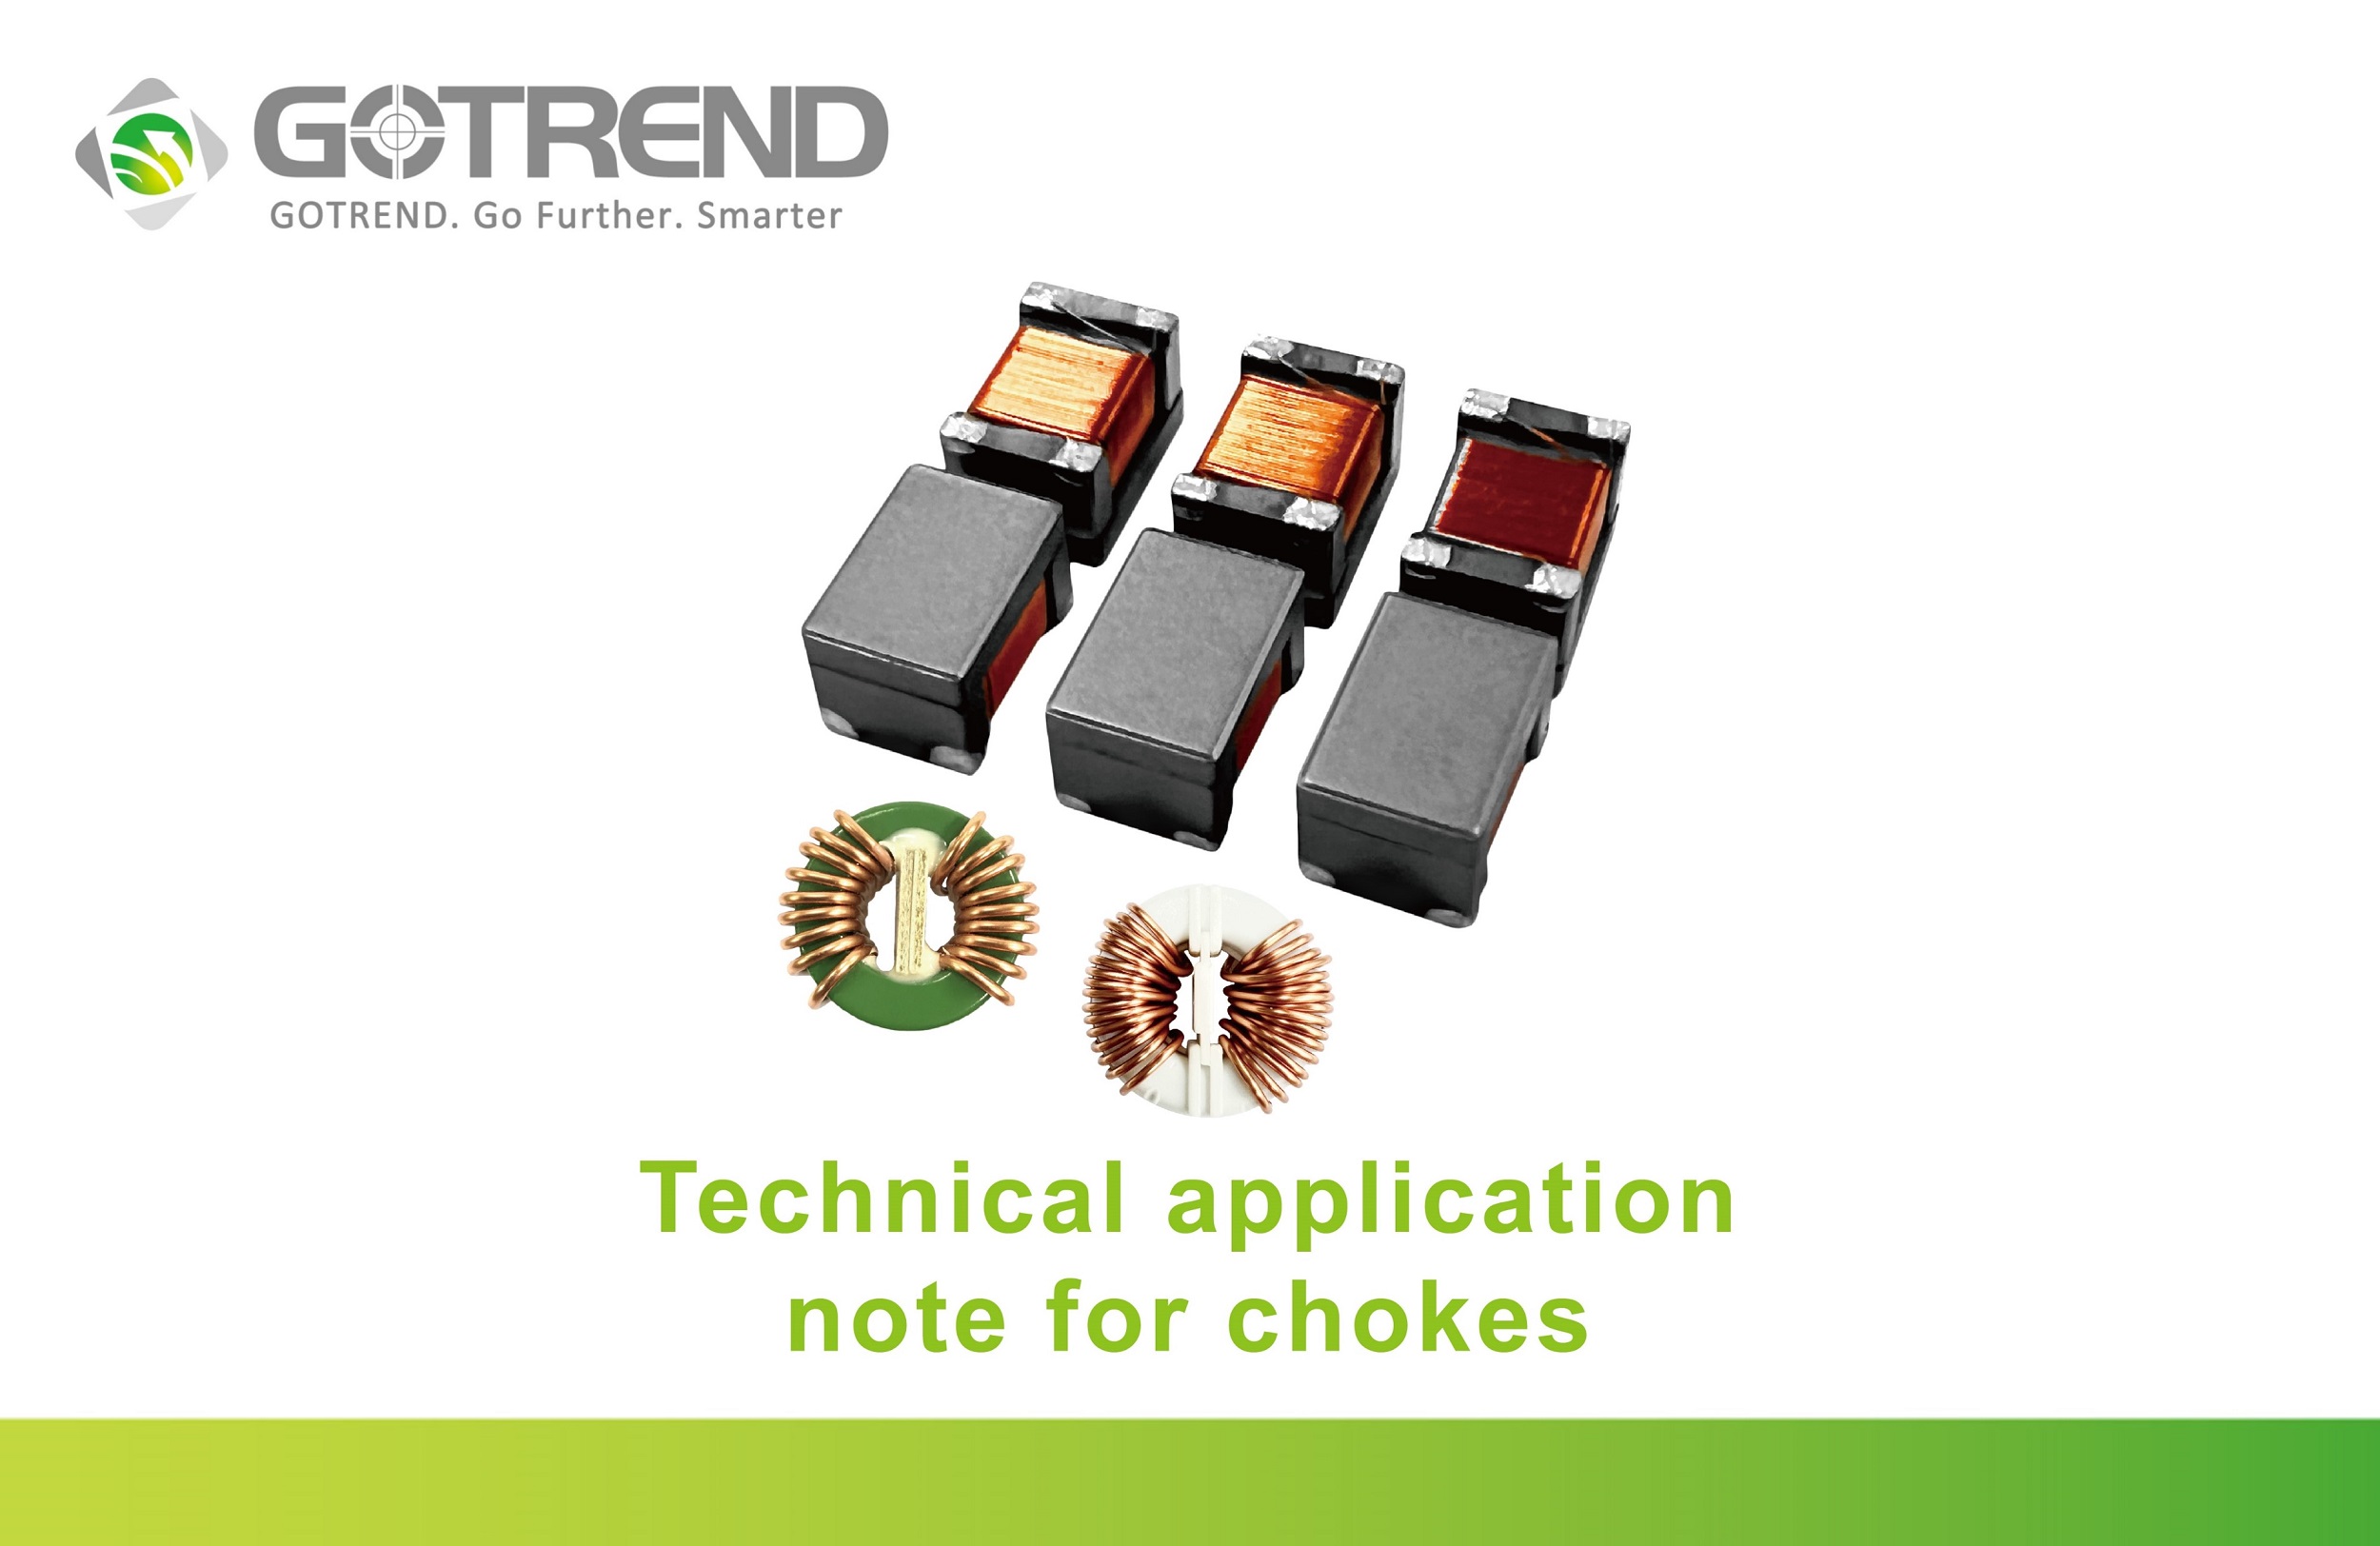 Technical application note for common mode choke